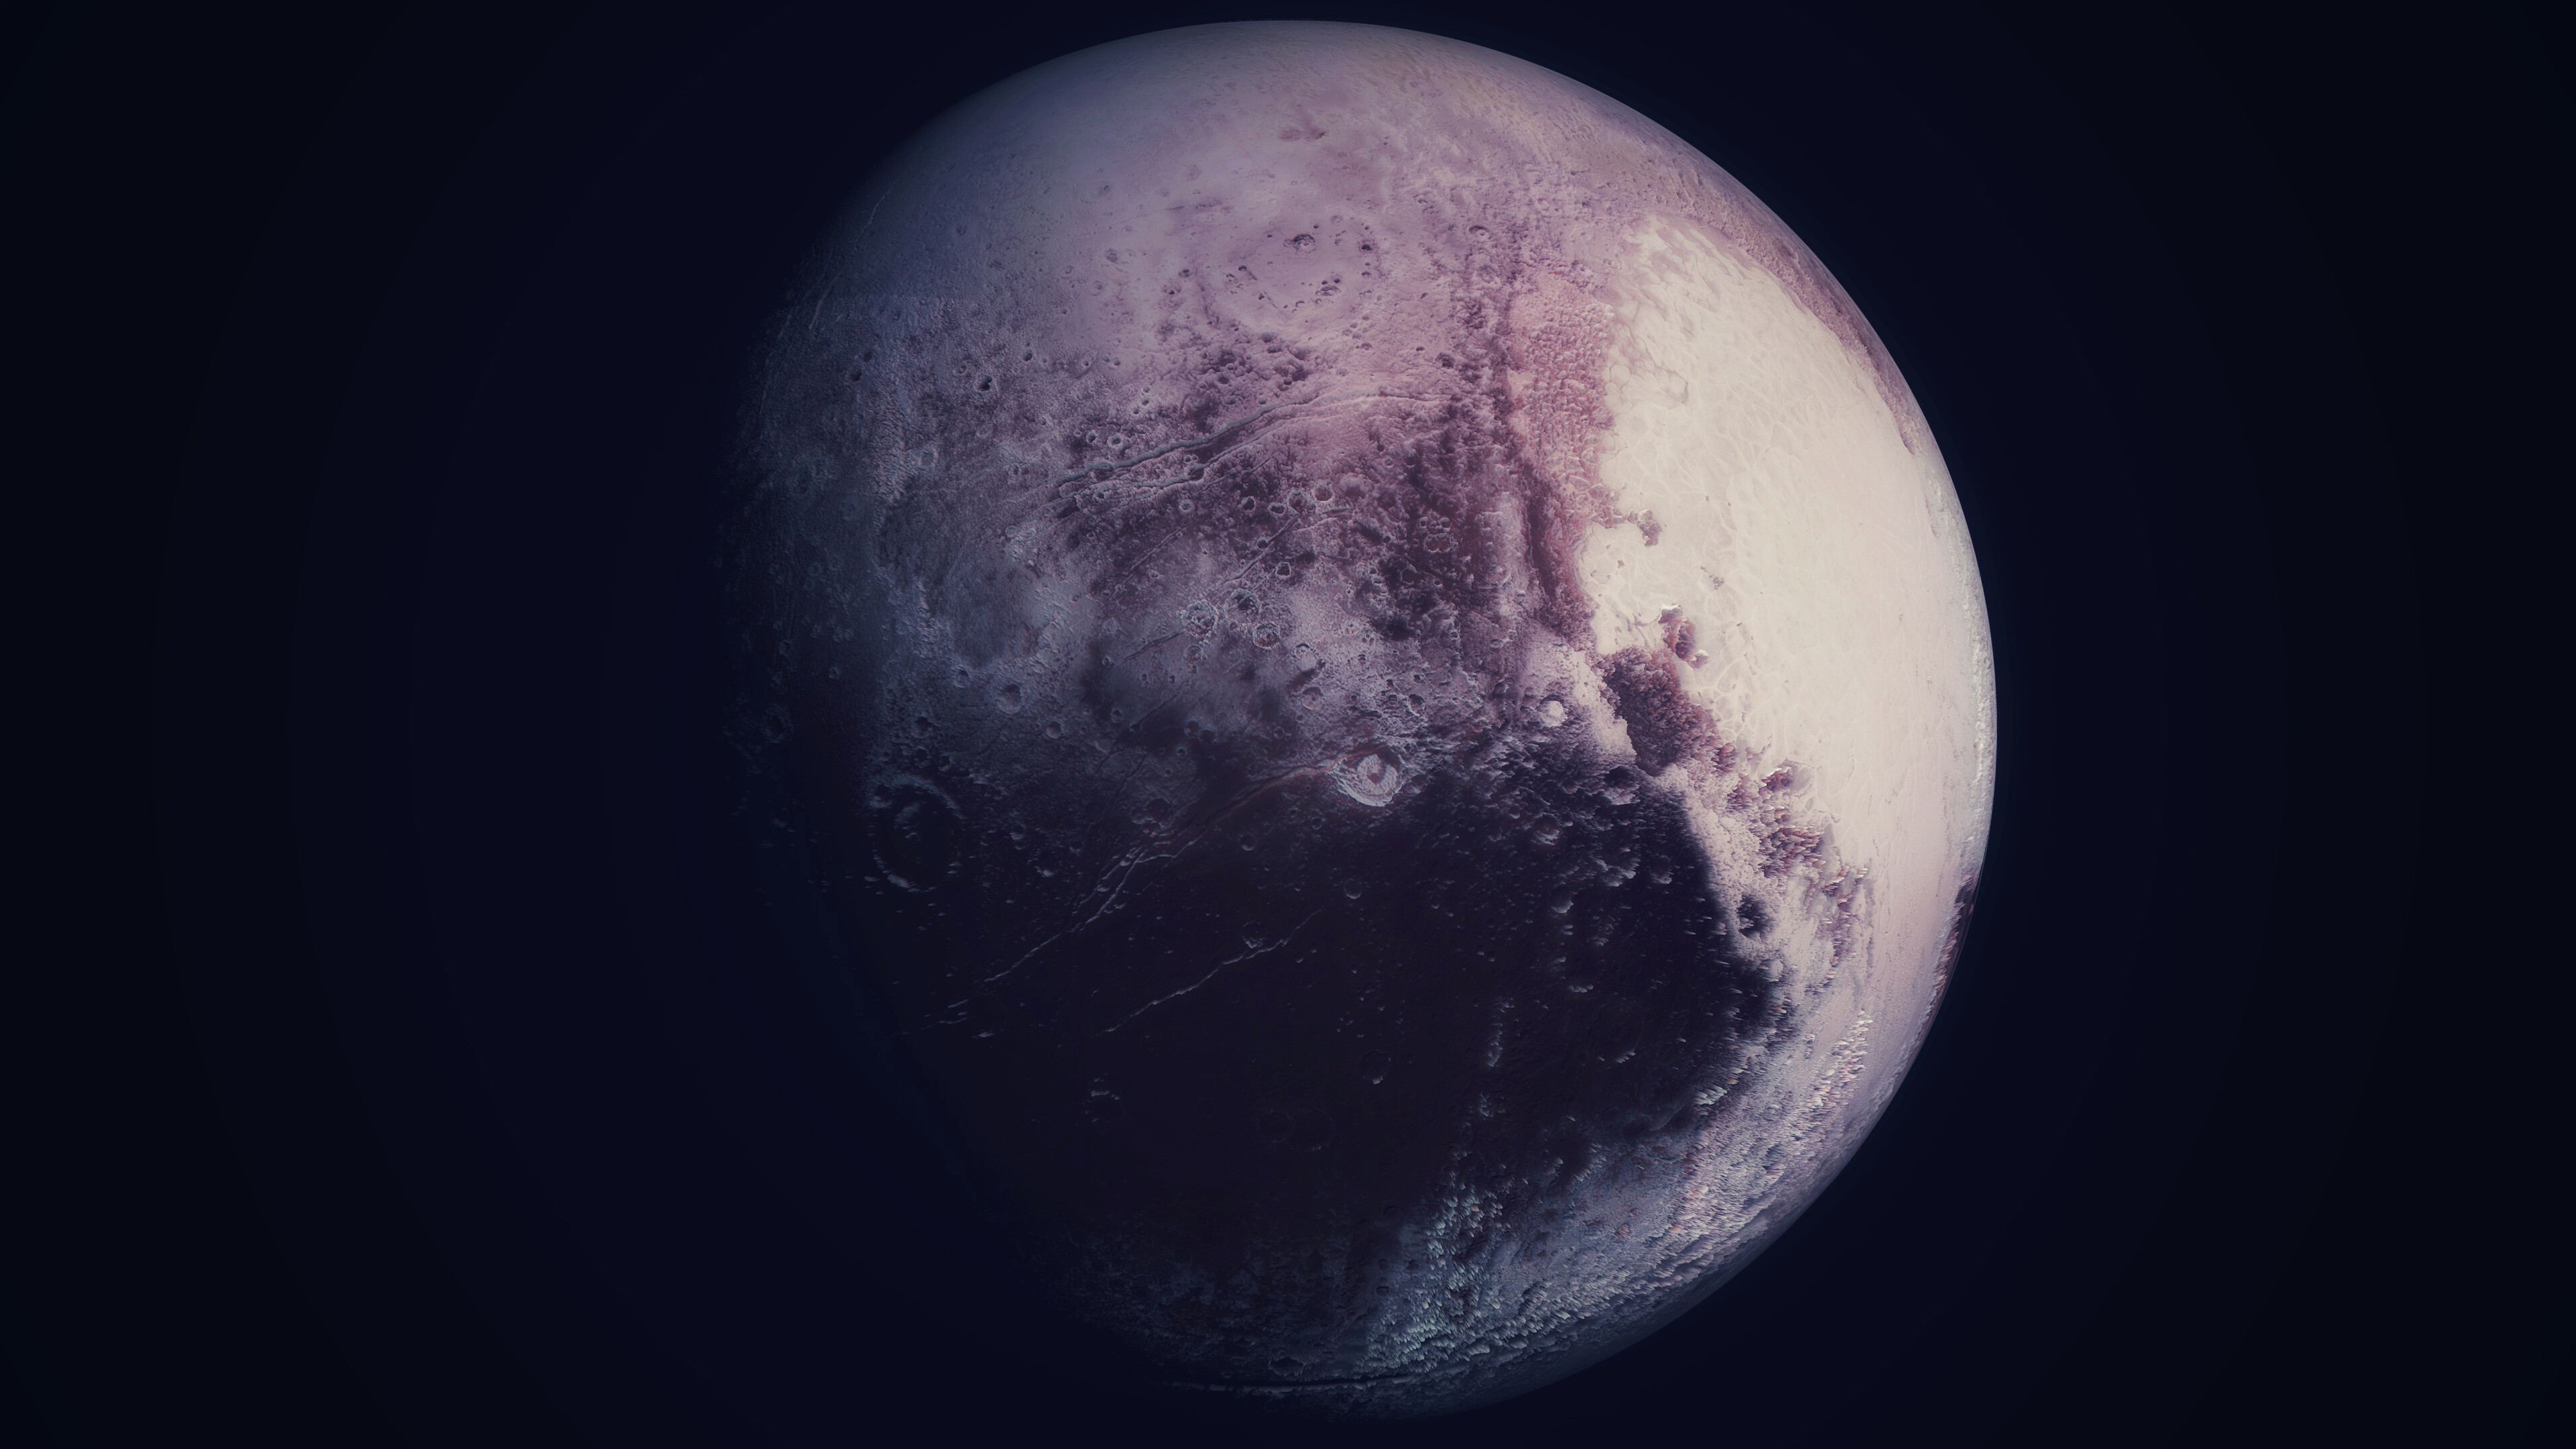 Pluto: Space, A dwarf planet in the Kuiper belt, a ring of bodies beyond the orbit of Neptune. 3840x2160 4K Wallpaper.